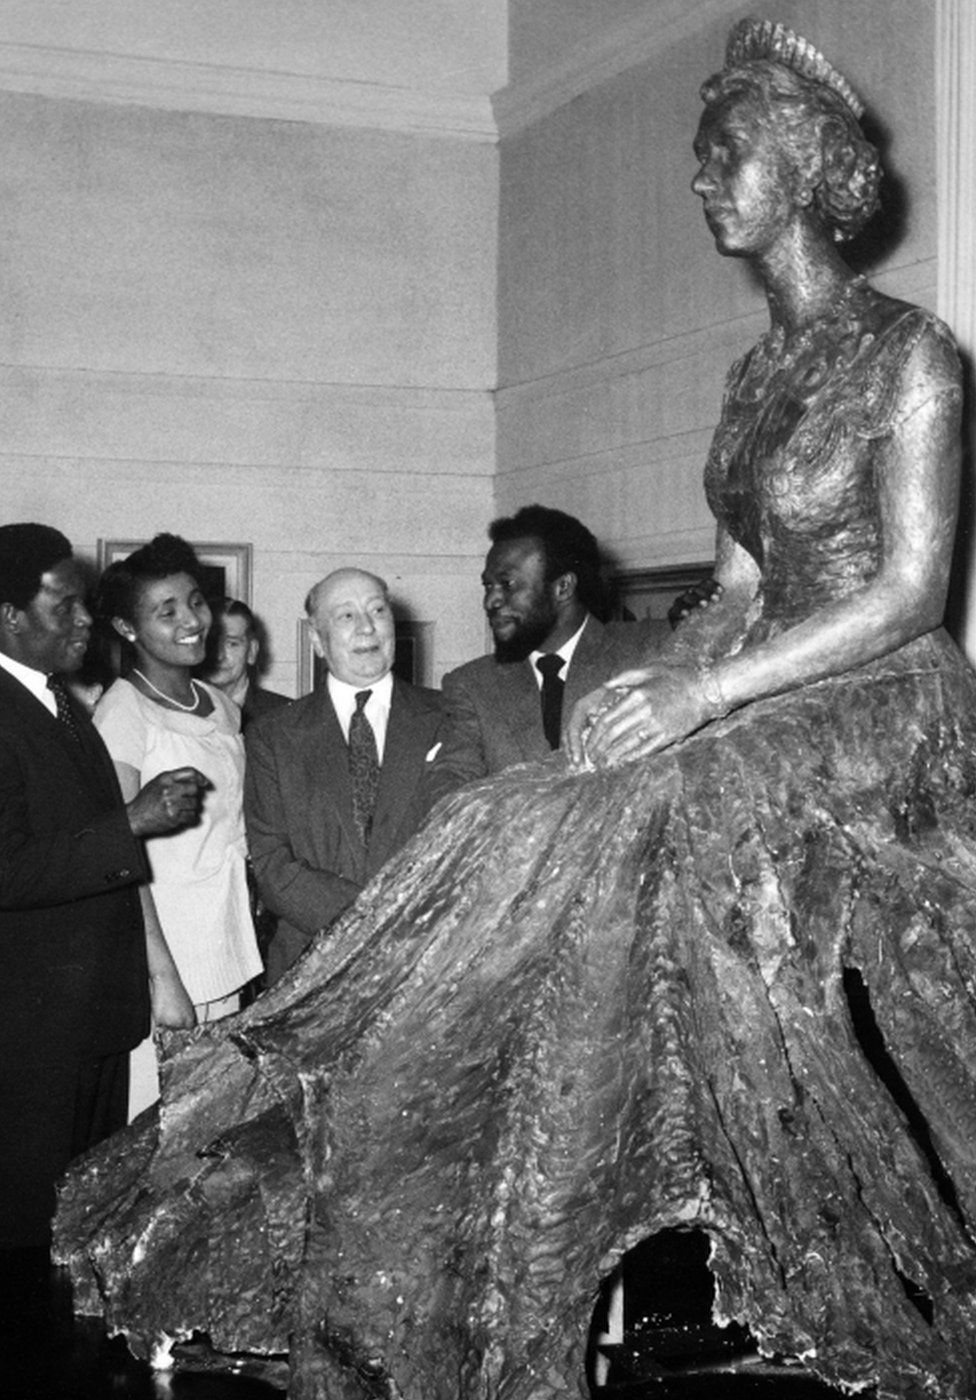 Ben Enwonwu at the unveiling of his portrait statue of the Queen at the Royal Society of British Artists in 1957